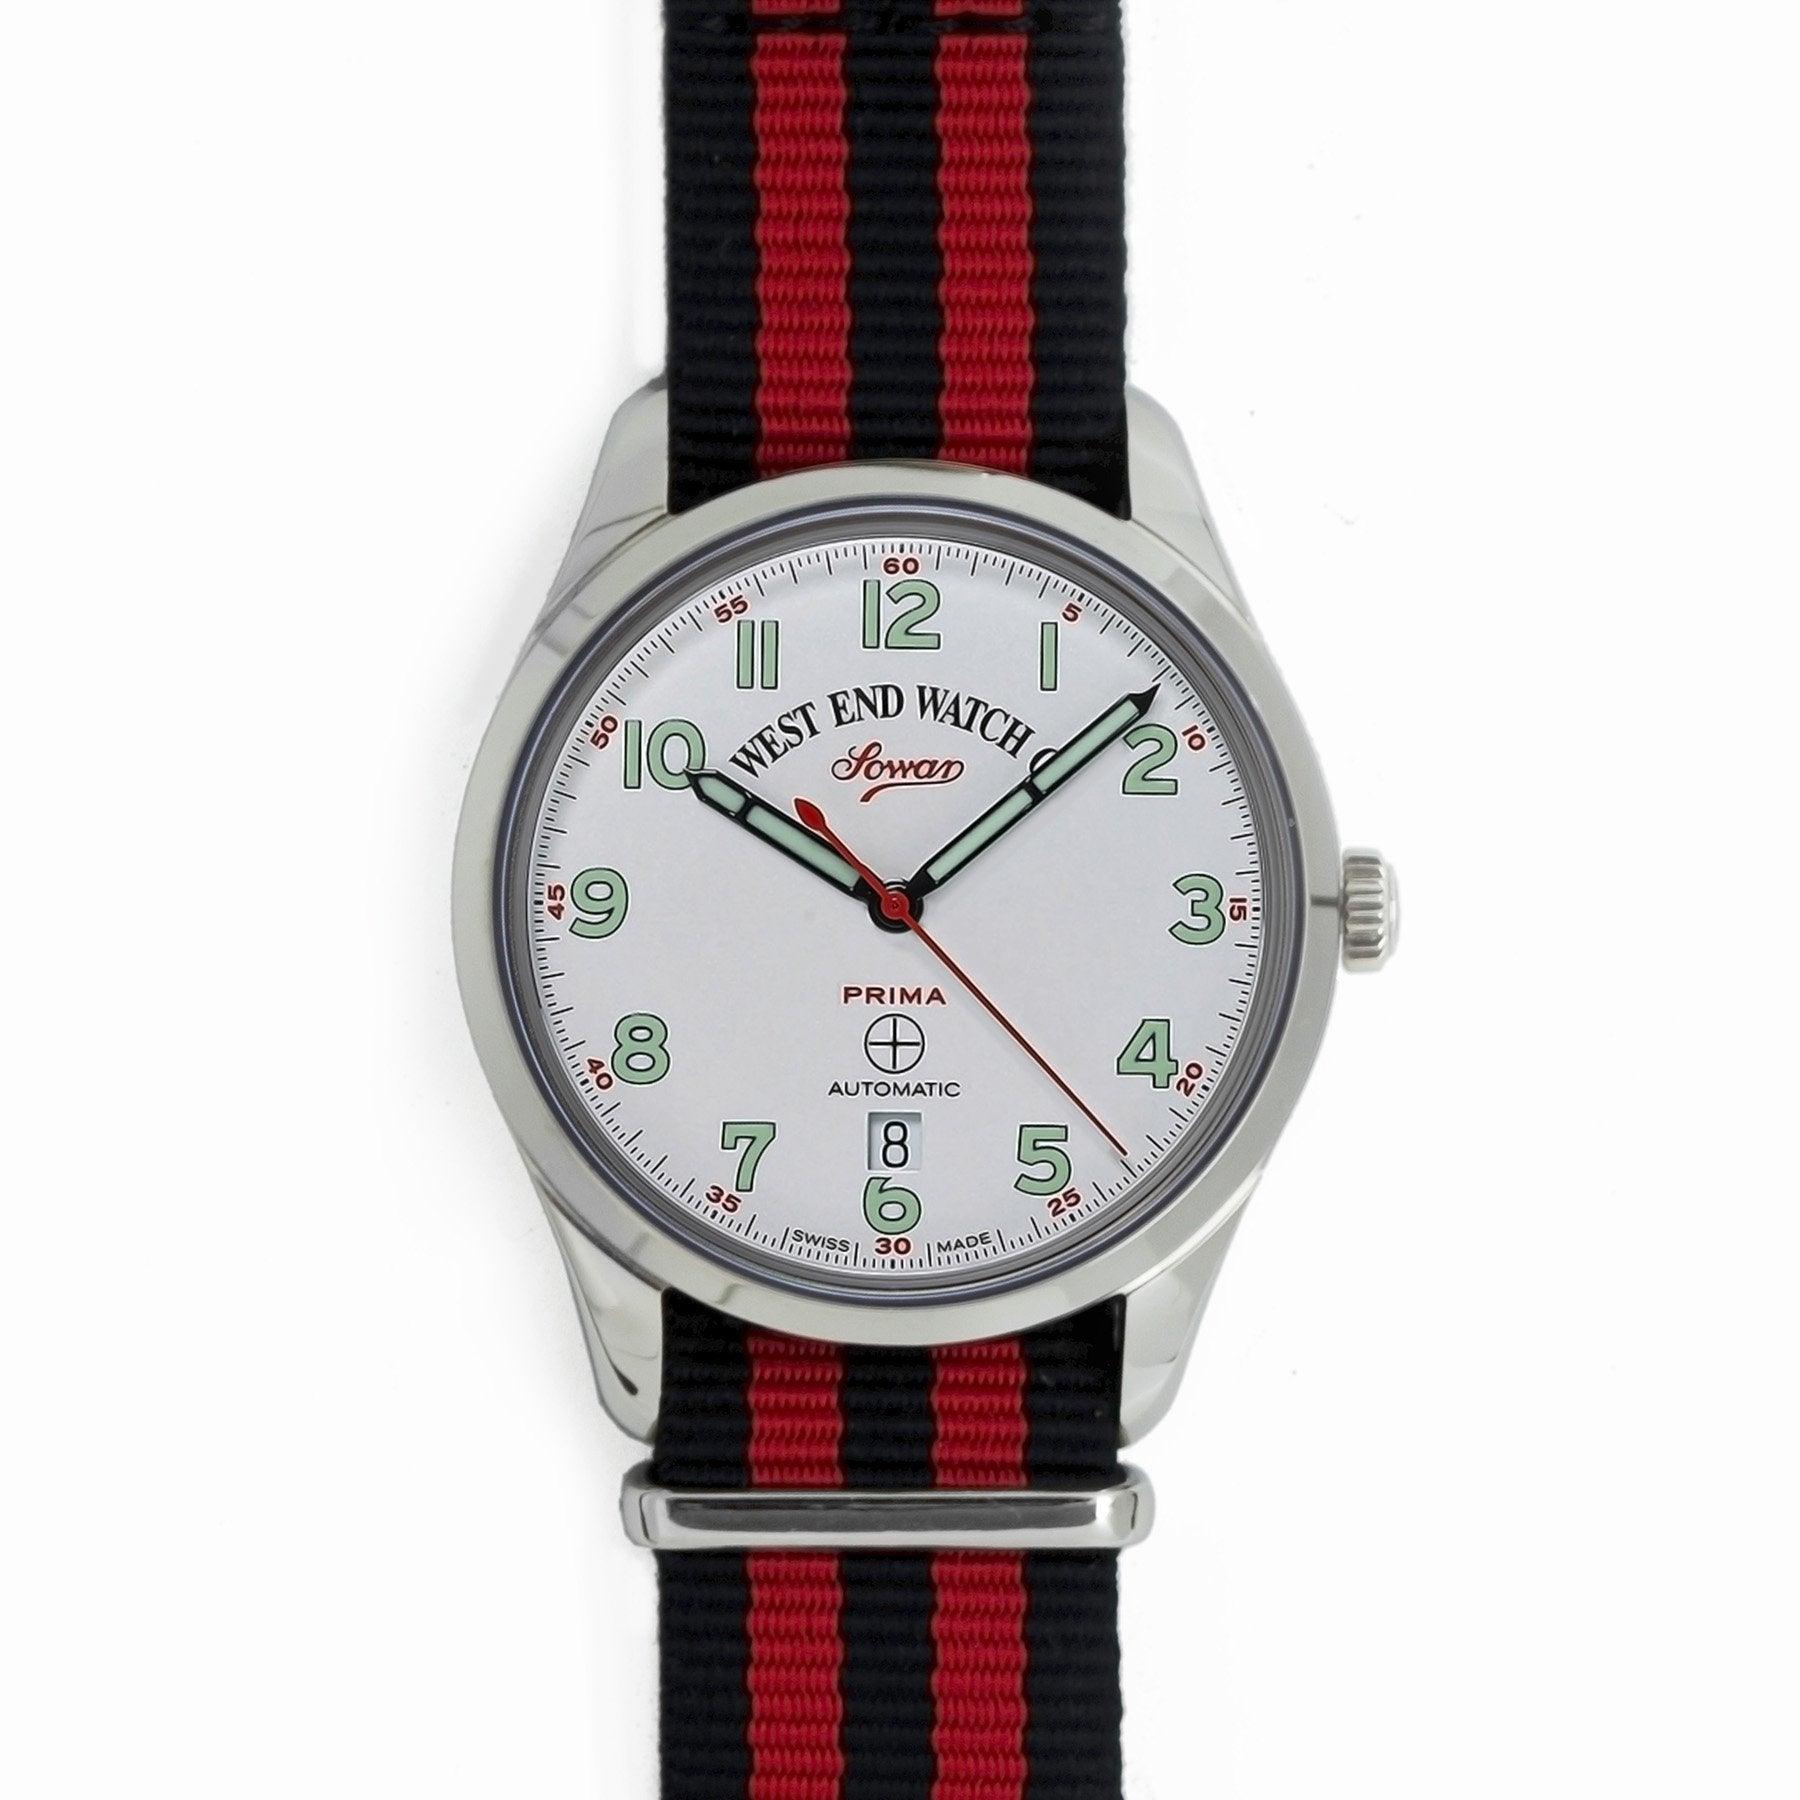 West End Watch Co., Sowar Prima White Dial, Analog Watch, Droz family,